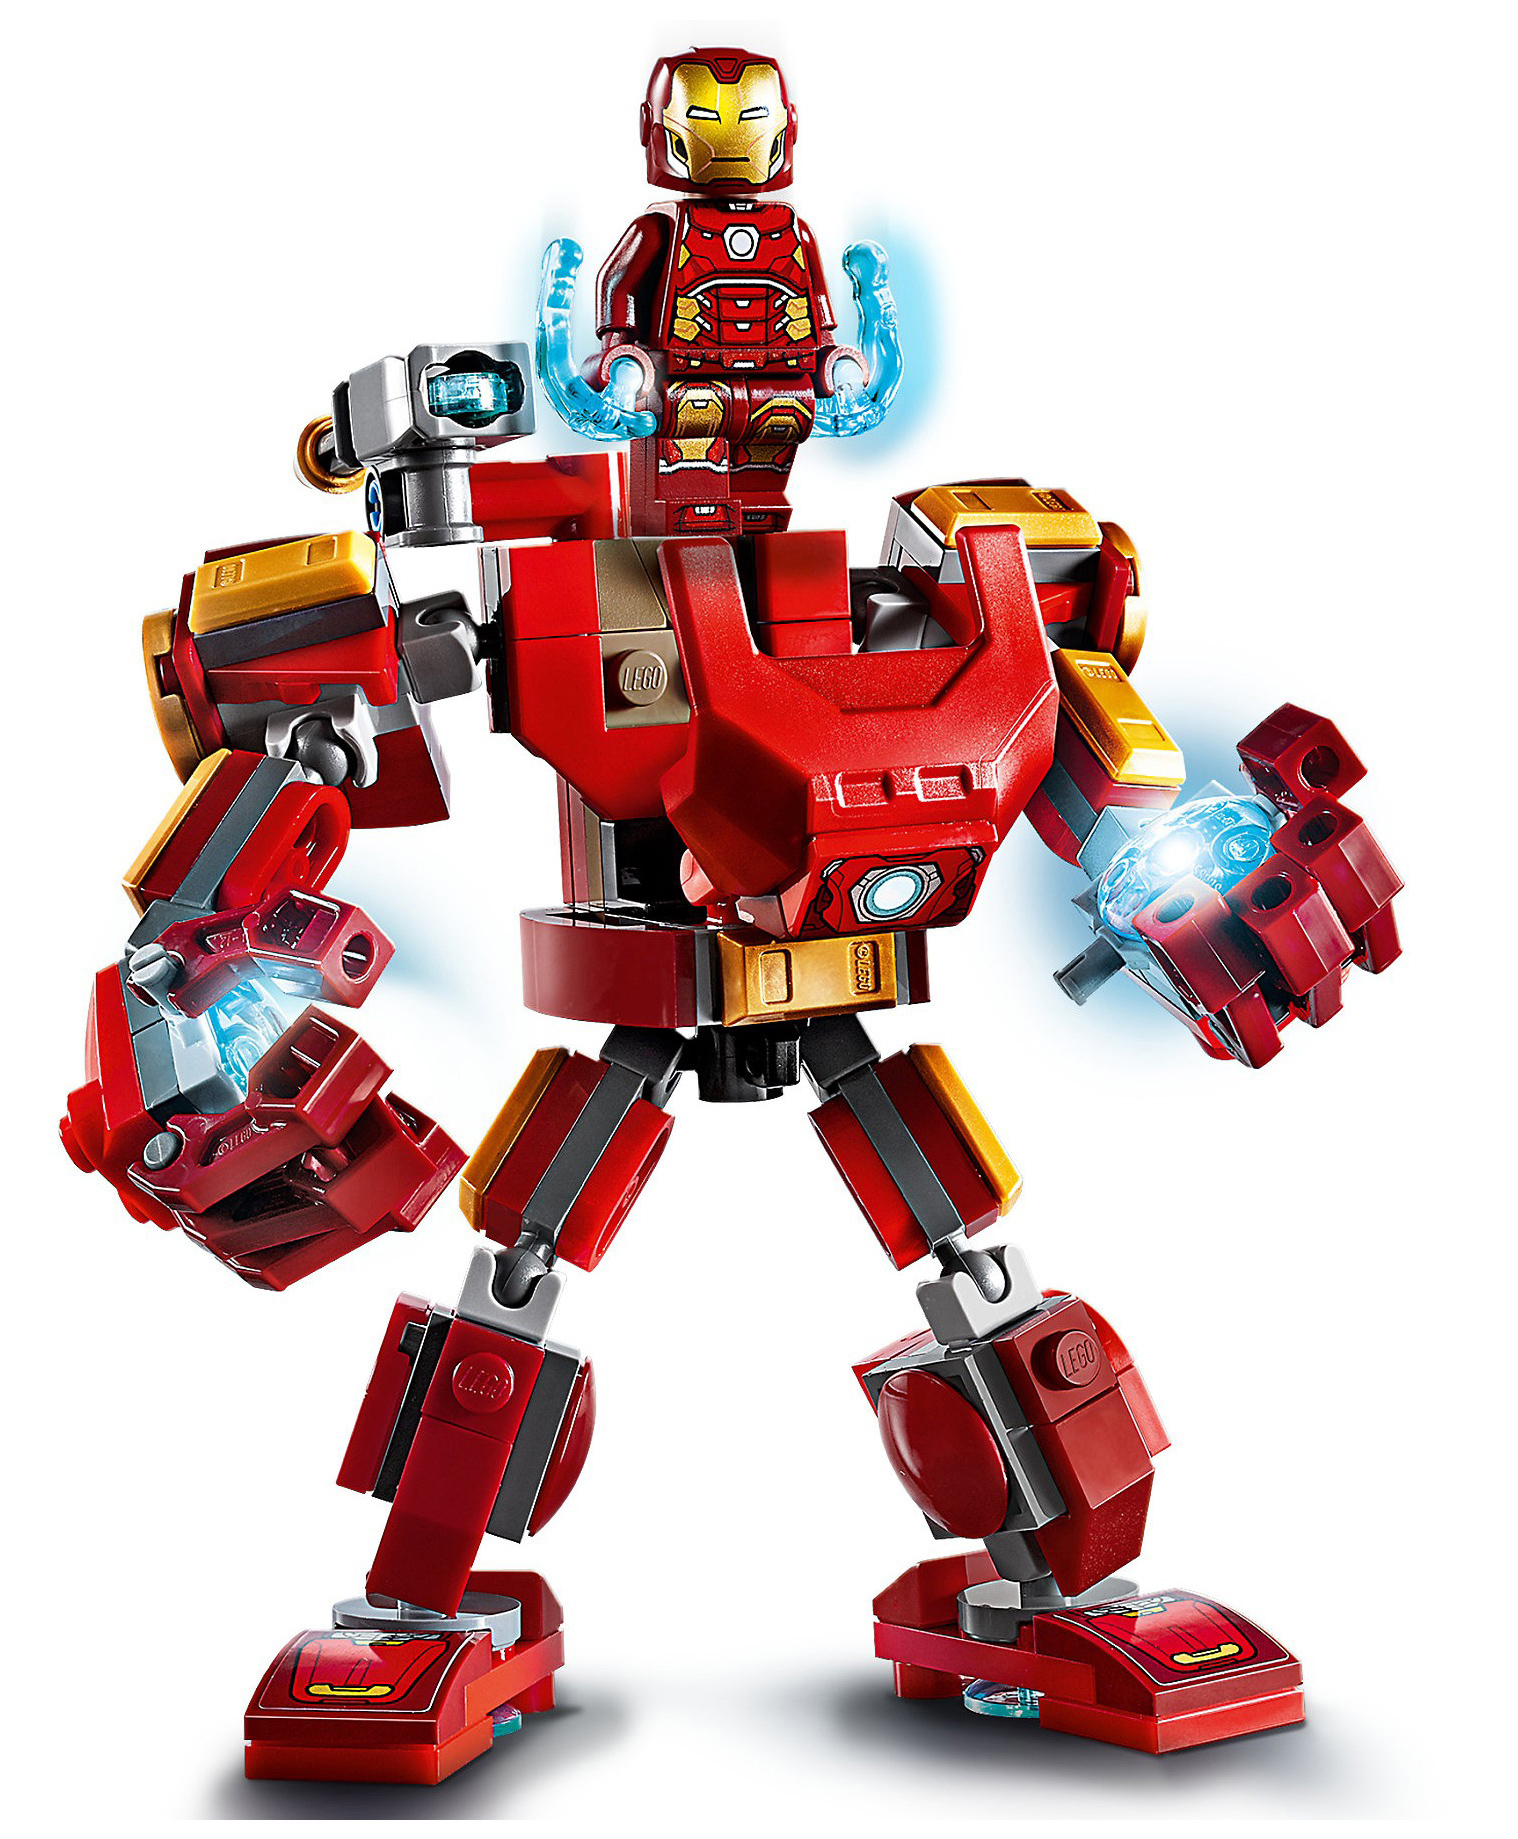 LEGO Super Heroes Marvel Avengers Iron Man Mech Set 76140 - 148 Pieces Online in UAE, Buy at 